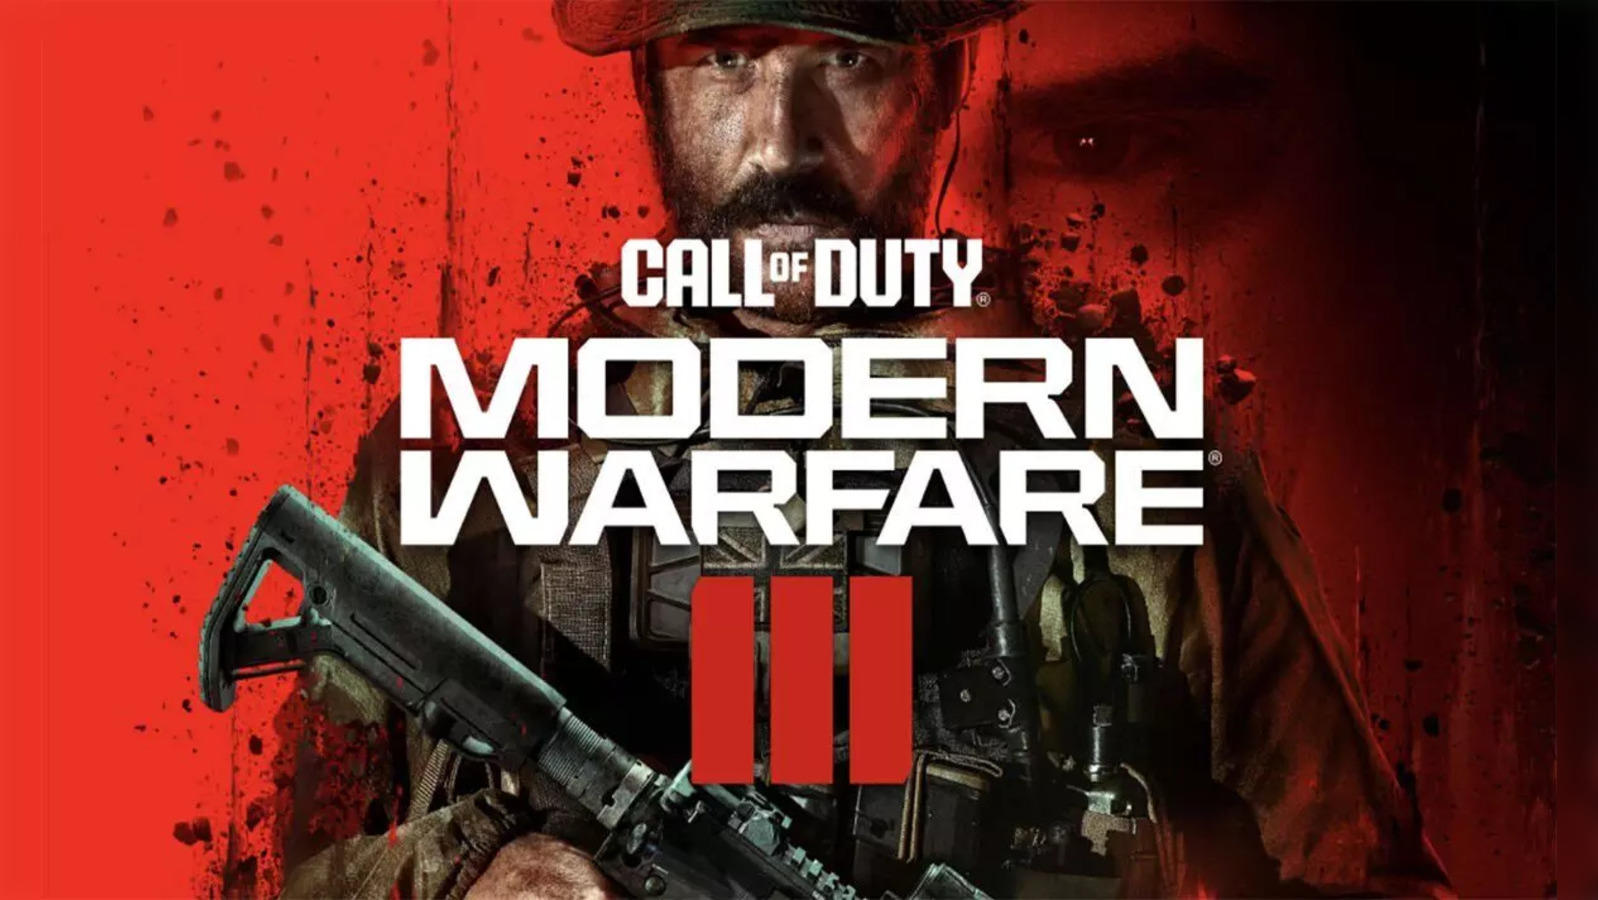 Details The of - and of Warfare on Times Modern PC, Call Xbox Economic Duty: reviews. date 5/4, Warfare Modern initial PlayStation 3: Duty: 3 series here Call release